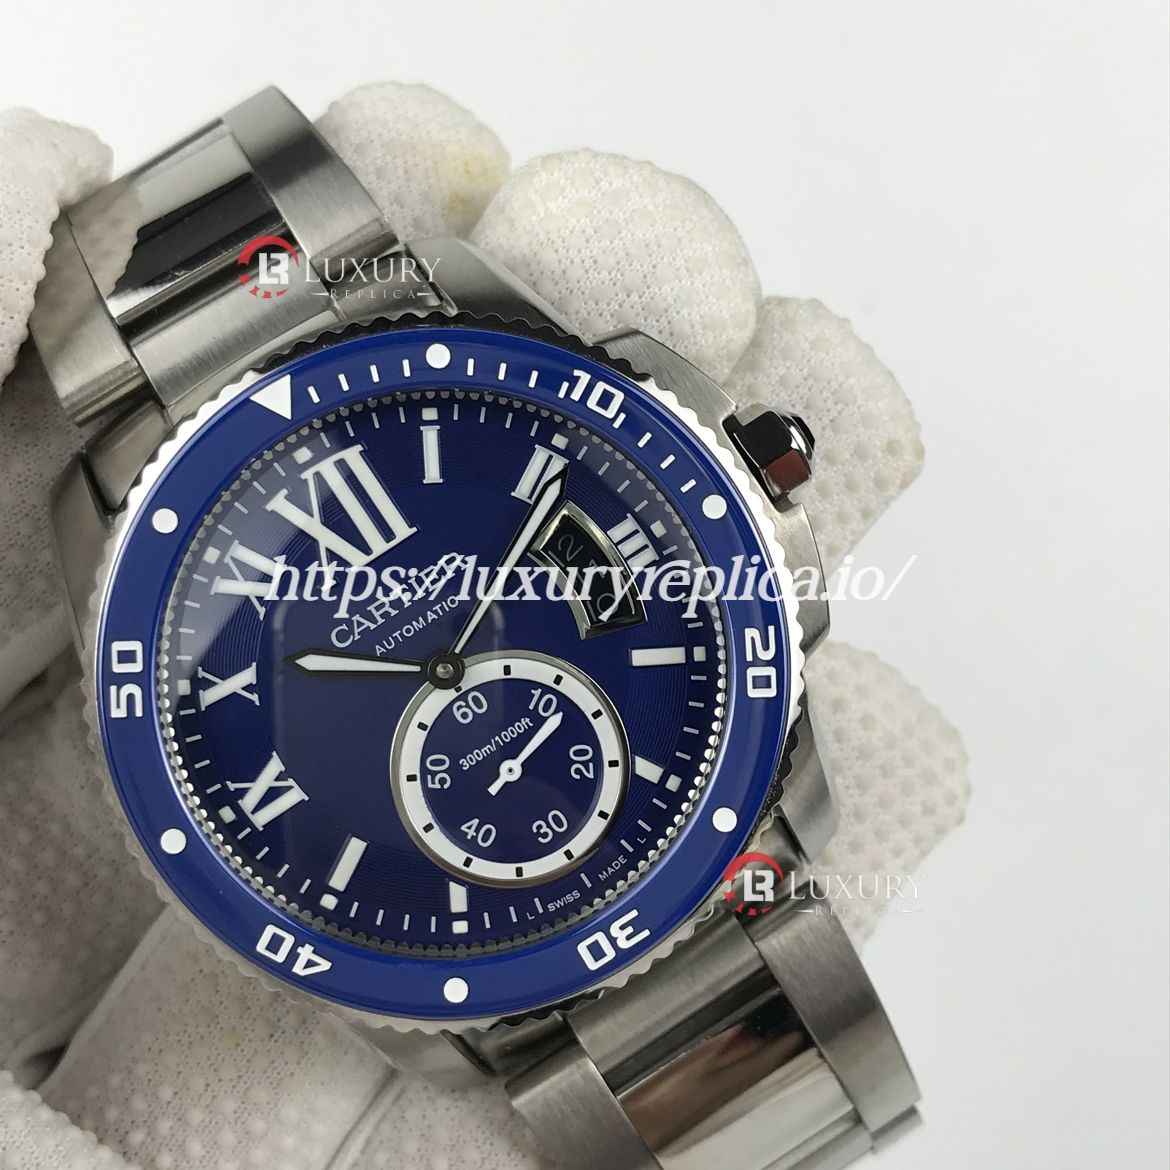 CARTIER CALIBRE DIVER STAINLESS STEEL BLUE